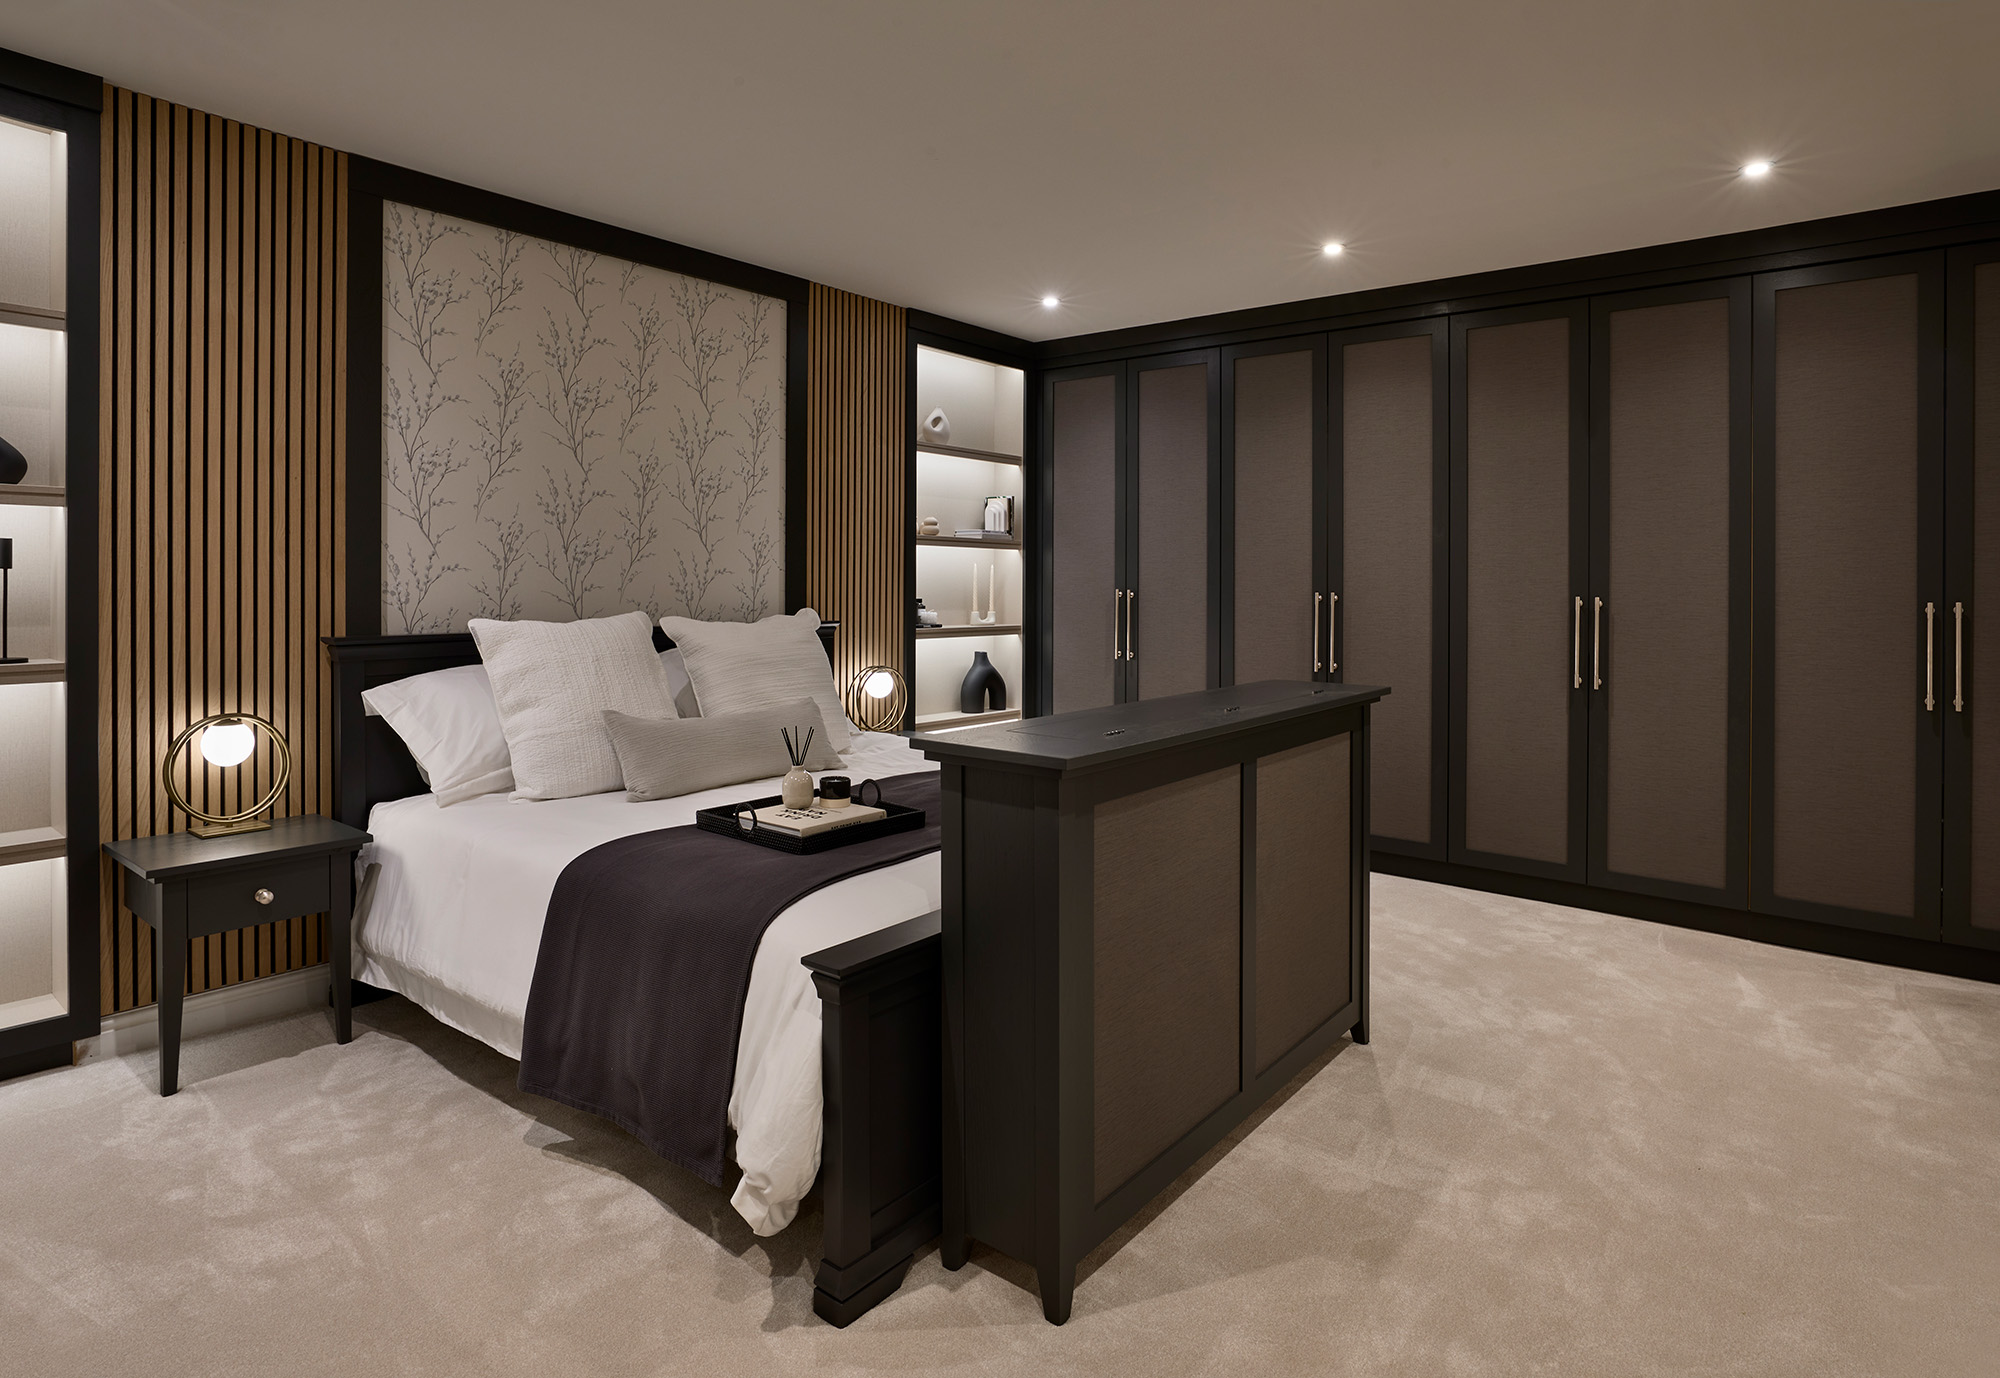 Aslockton - Bedroom with Pop up Tv Cabinet Main Image